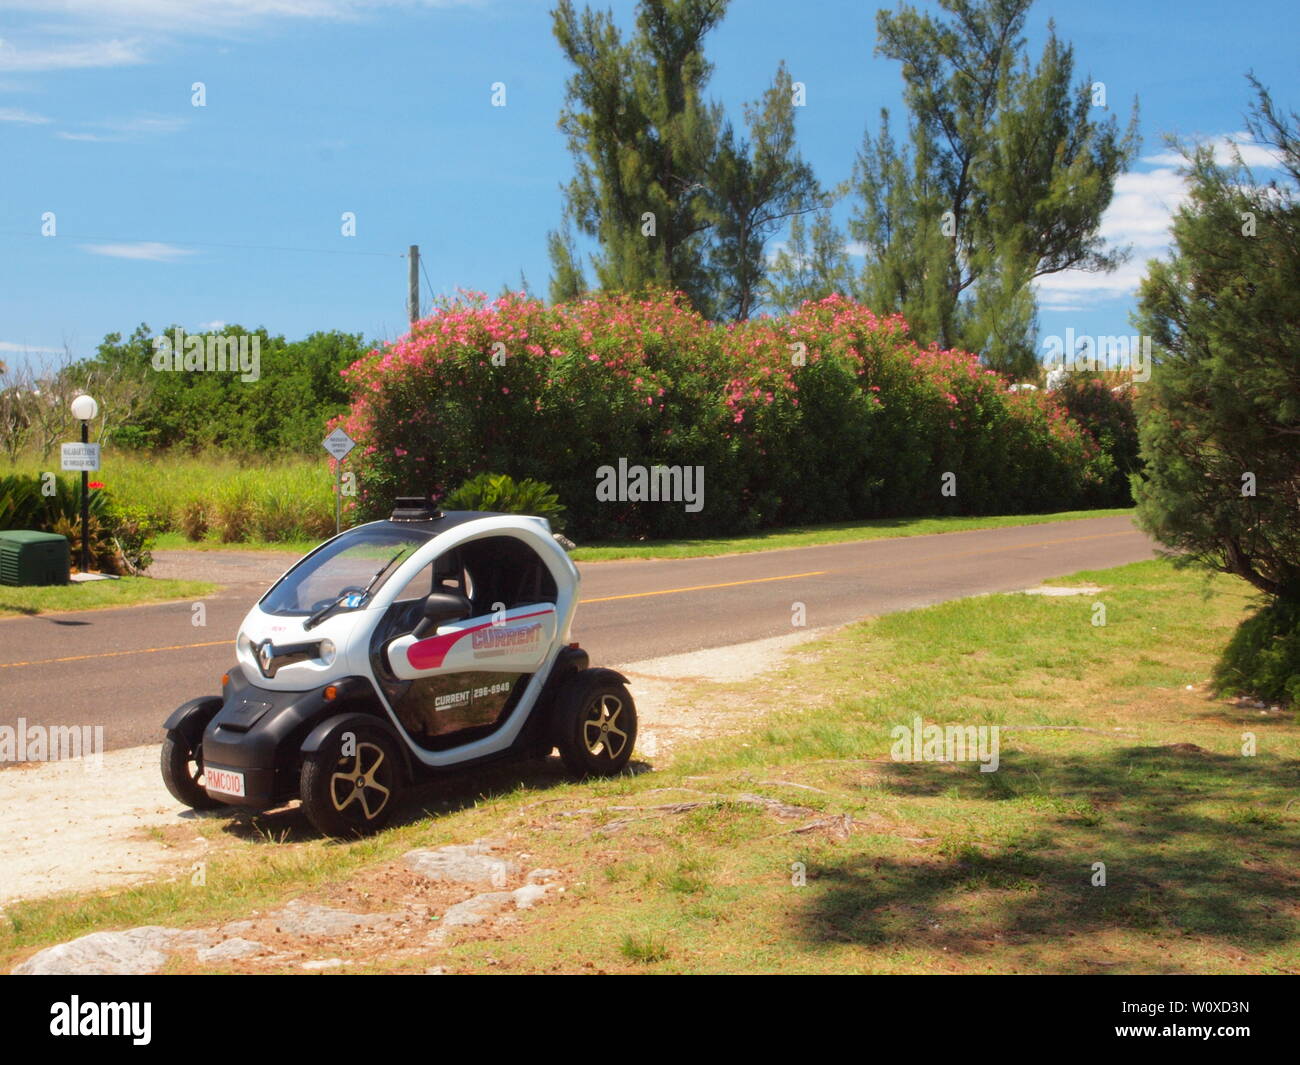 The latest tourist travel adventure in Bermuda. The Renault Twizy, an all electric vehicle that allows freedom and independence to tour safely. Stock Photo